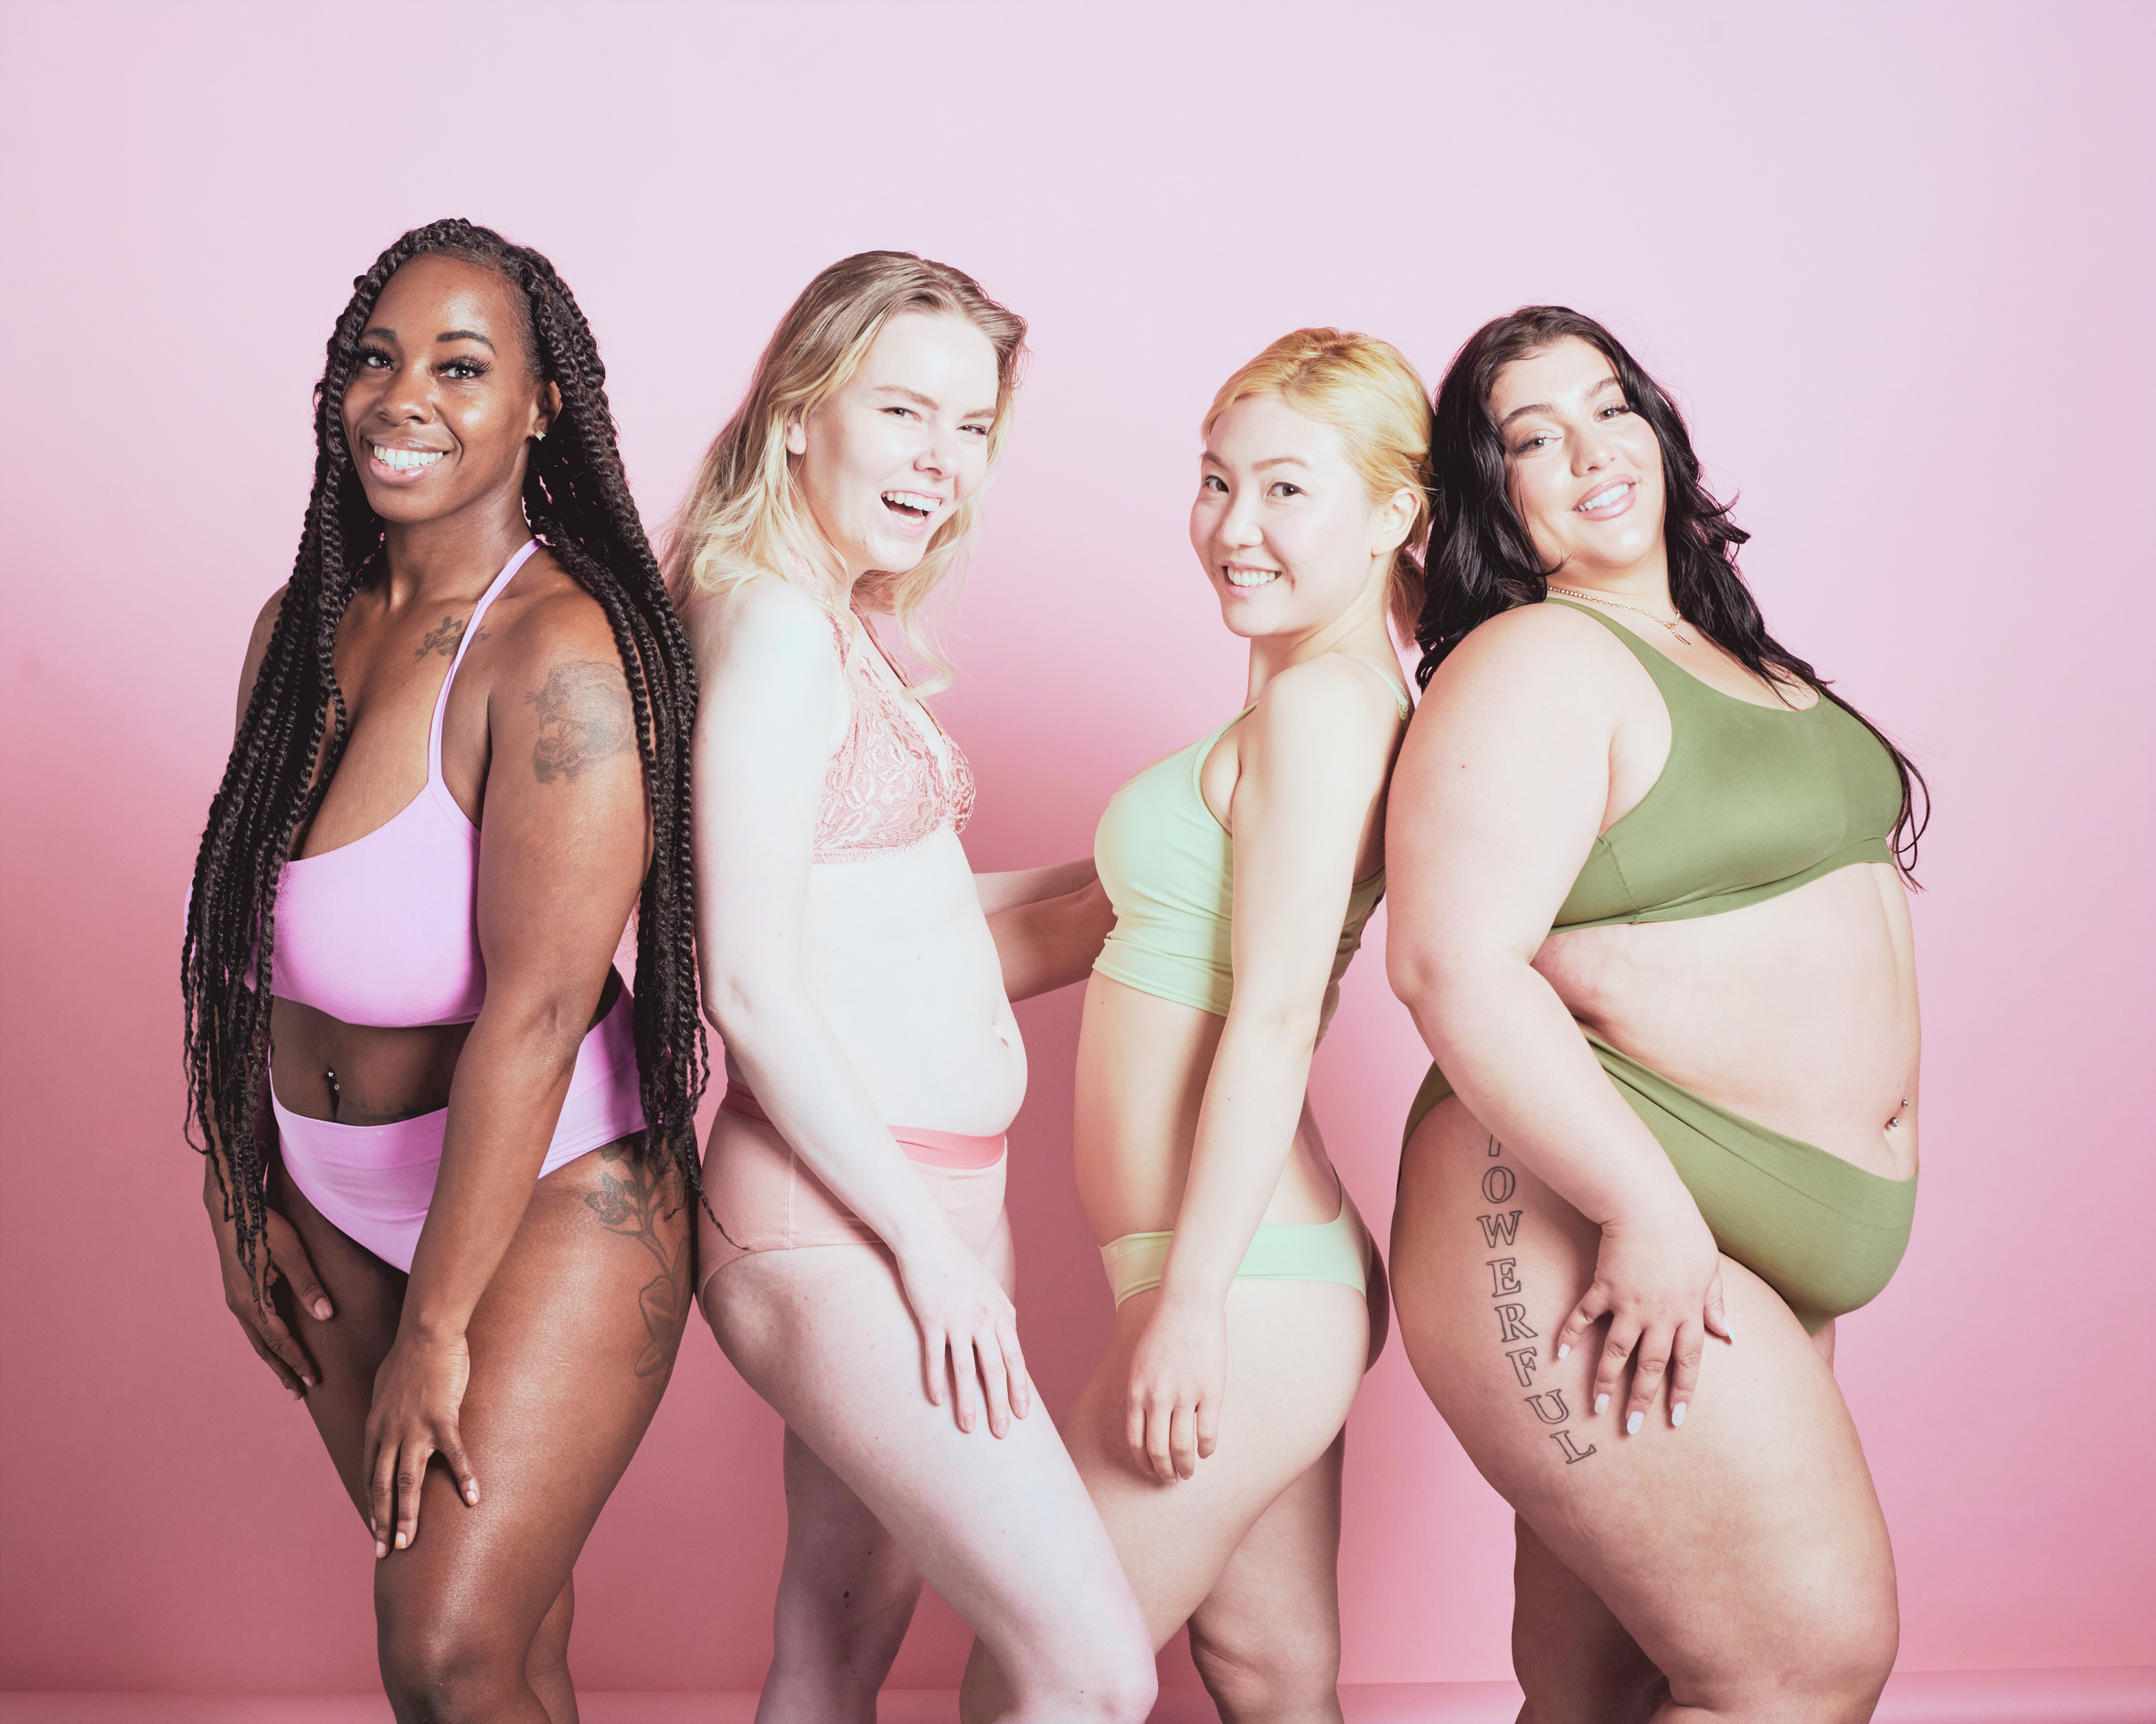 Group of diverse women celebrating their bodies